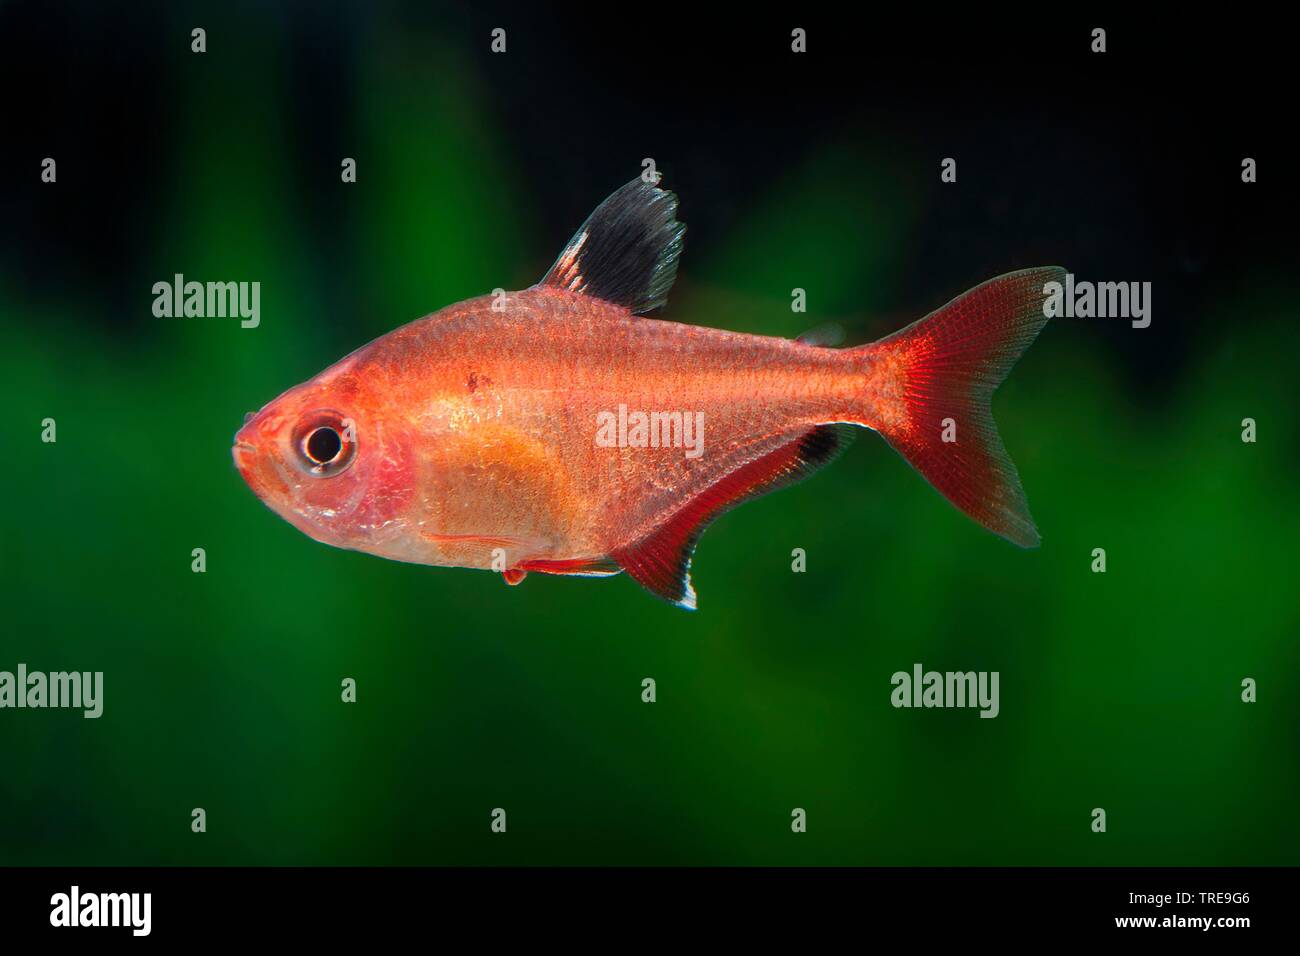 Red Minor tetra, Serpa tetra (Hyphessobrycon eques), swimming, side view Stock Photo